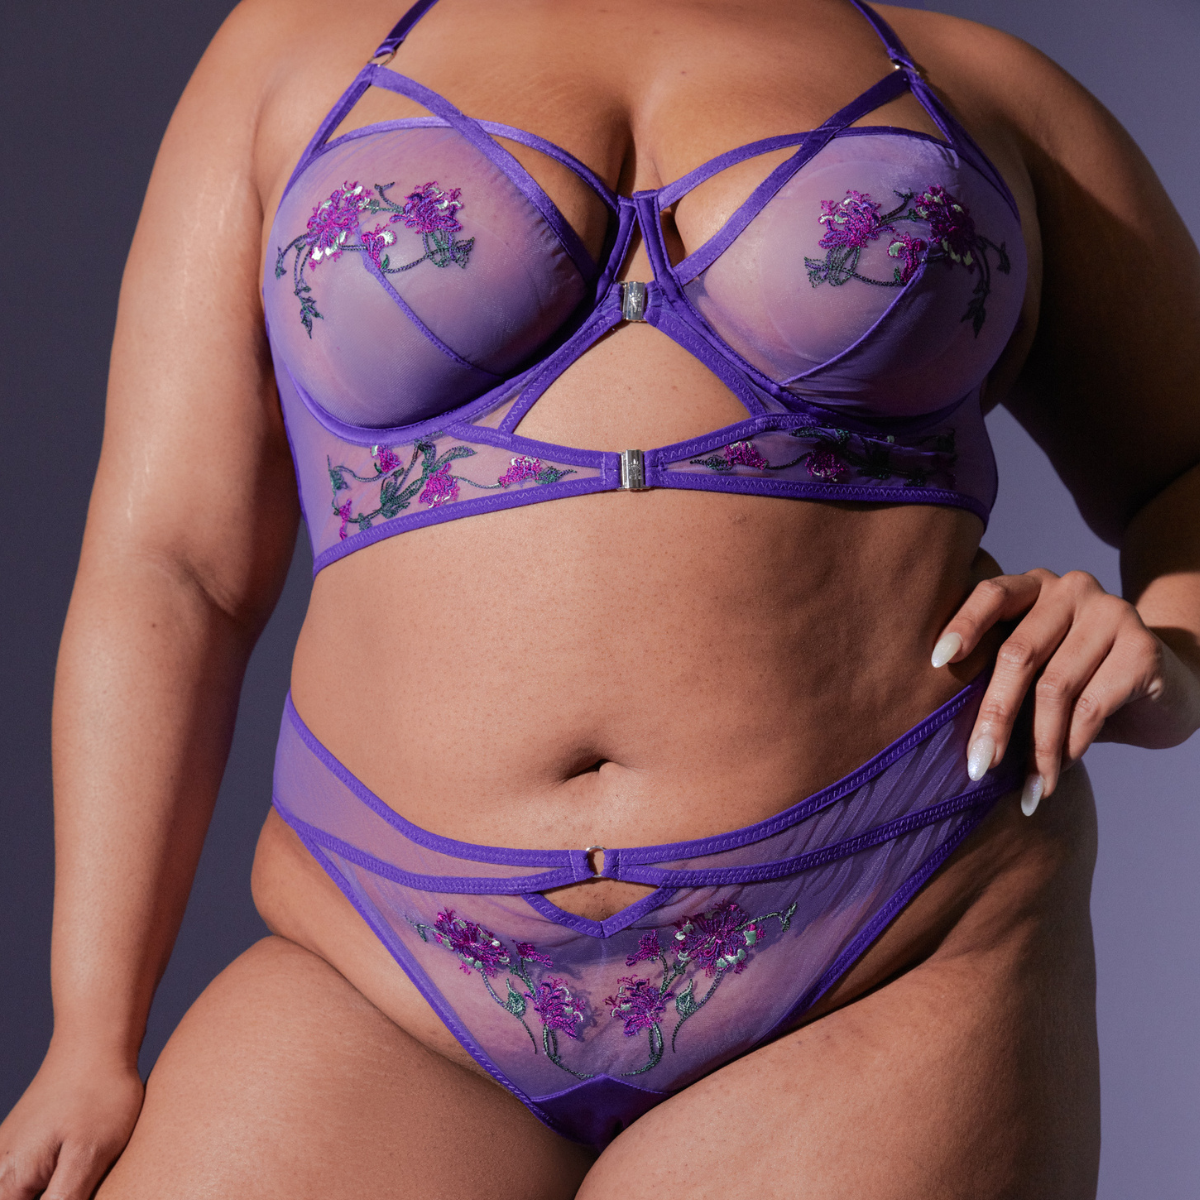 Thistle & Spire are expanding their size and nude mesh shades ranges 